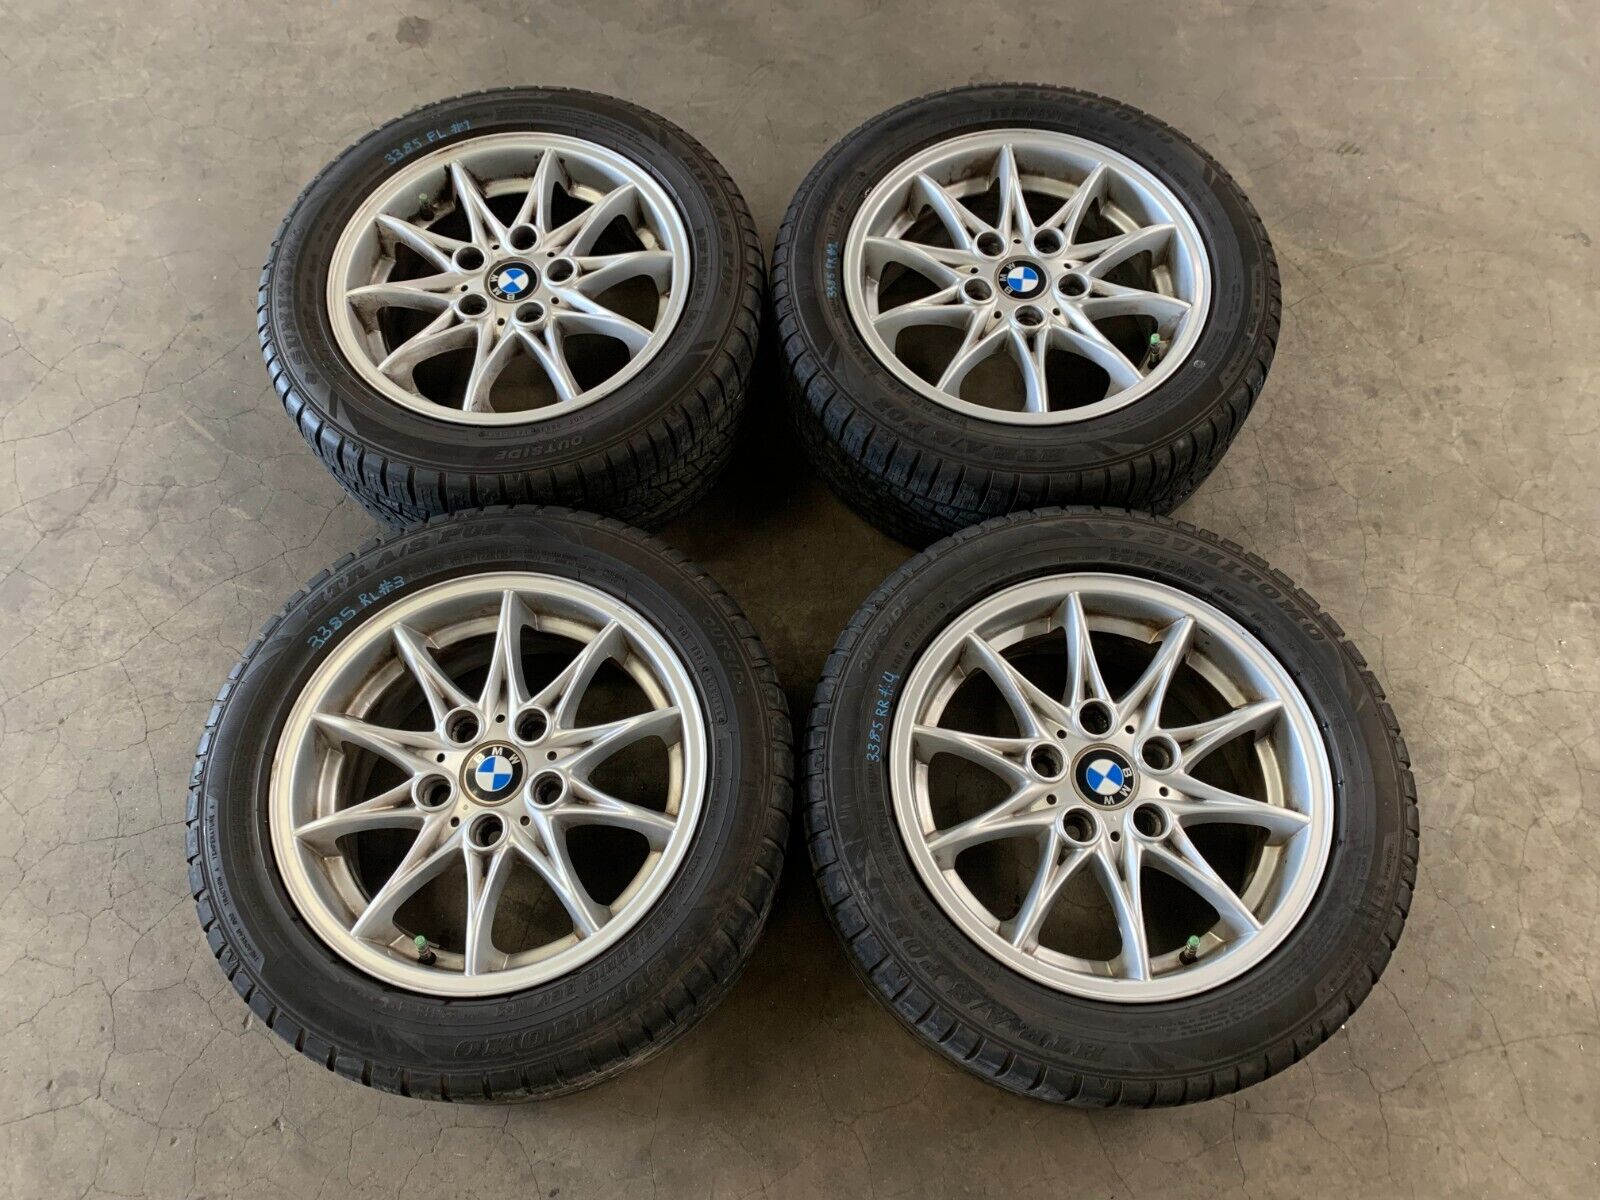 03-05 BMW Z4 SET OF 4 WHEEL RIMS WITH TIRES FRONT & REAR 225/50R16, OEM LOT3385